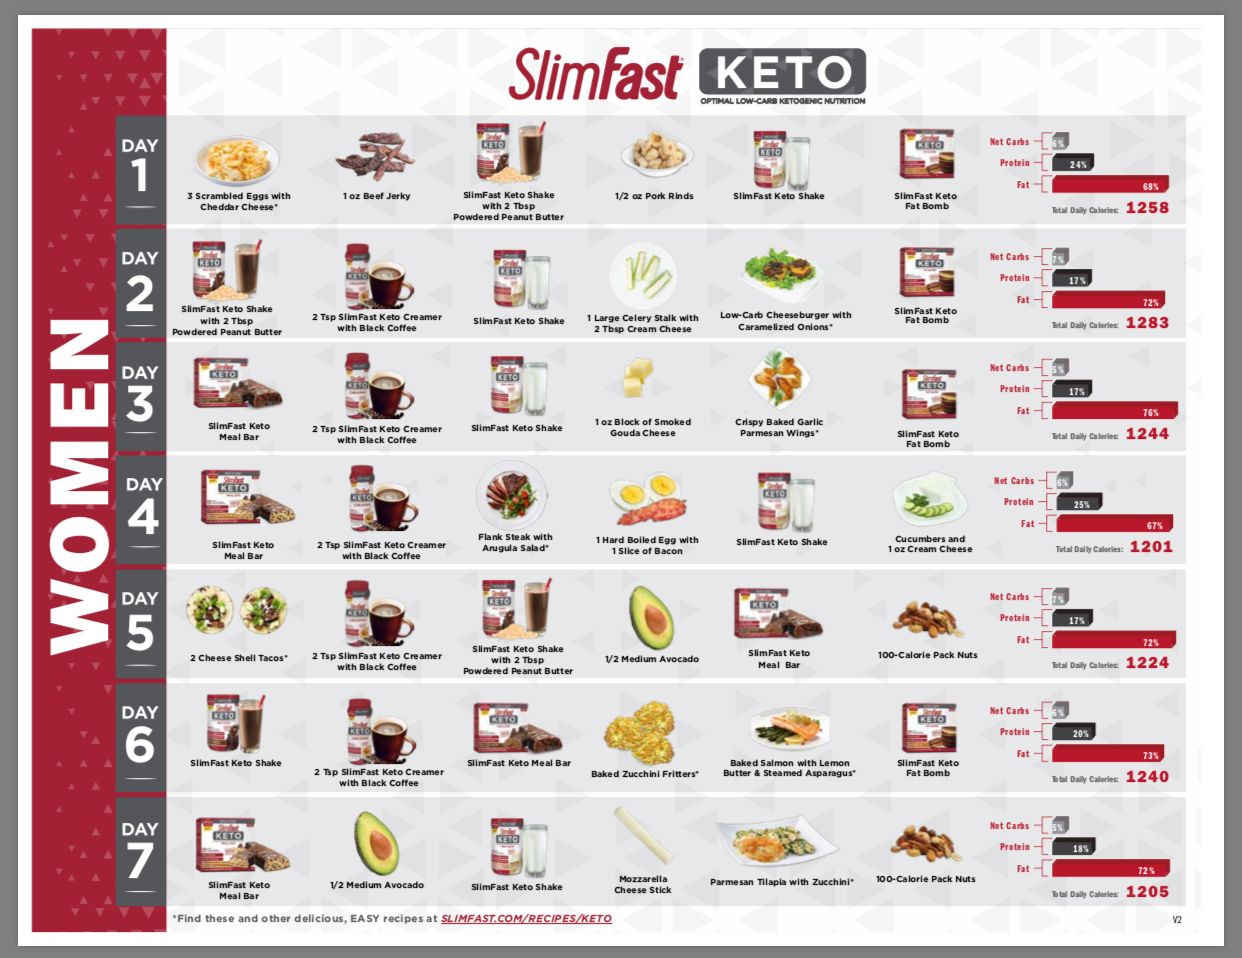 Keto Diet Plans To Lose Weight For Women
 KETO 7 day meal plan women Slimfast